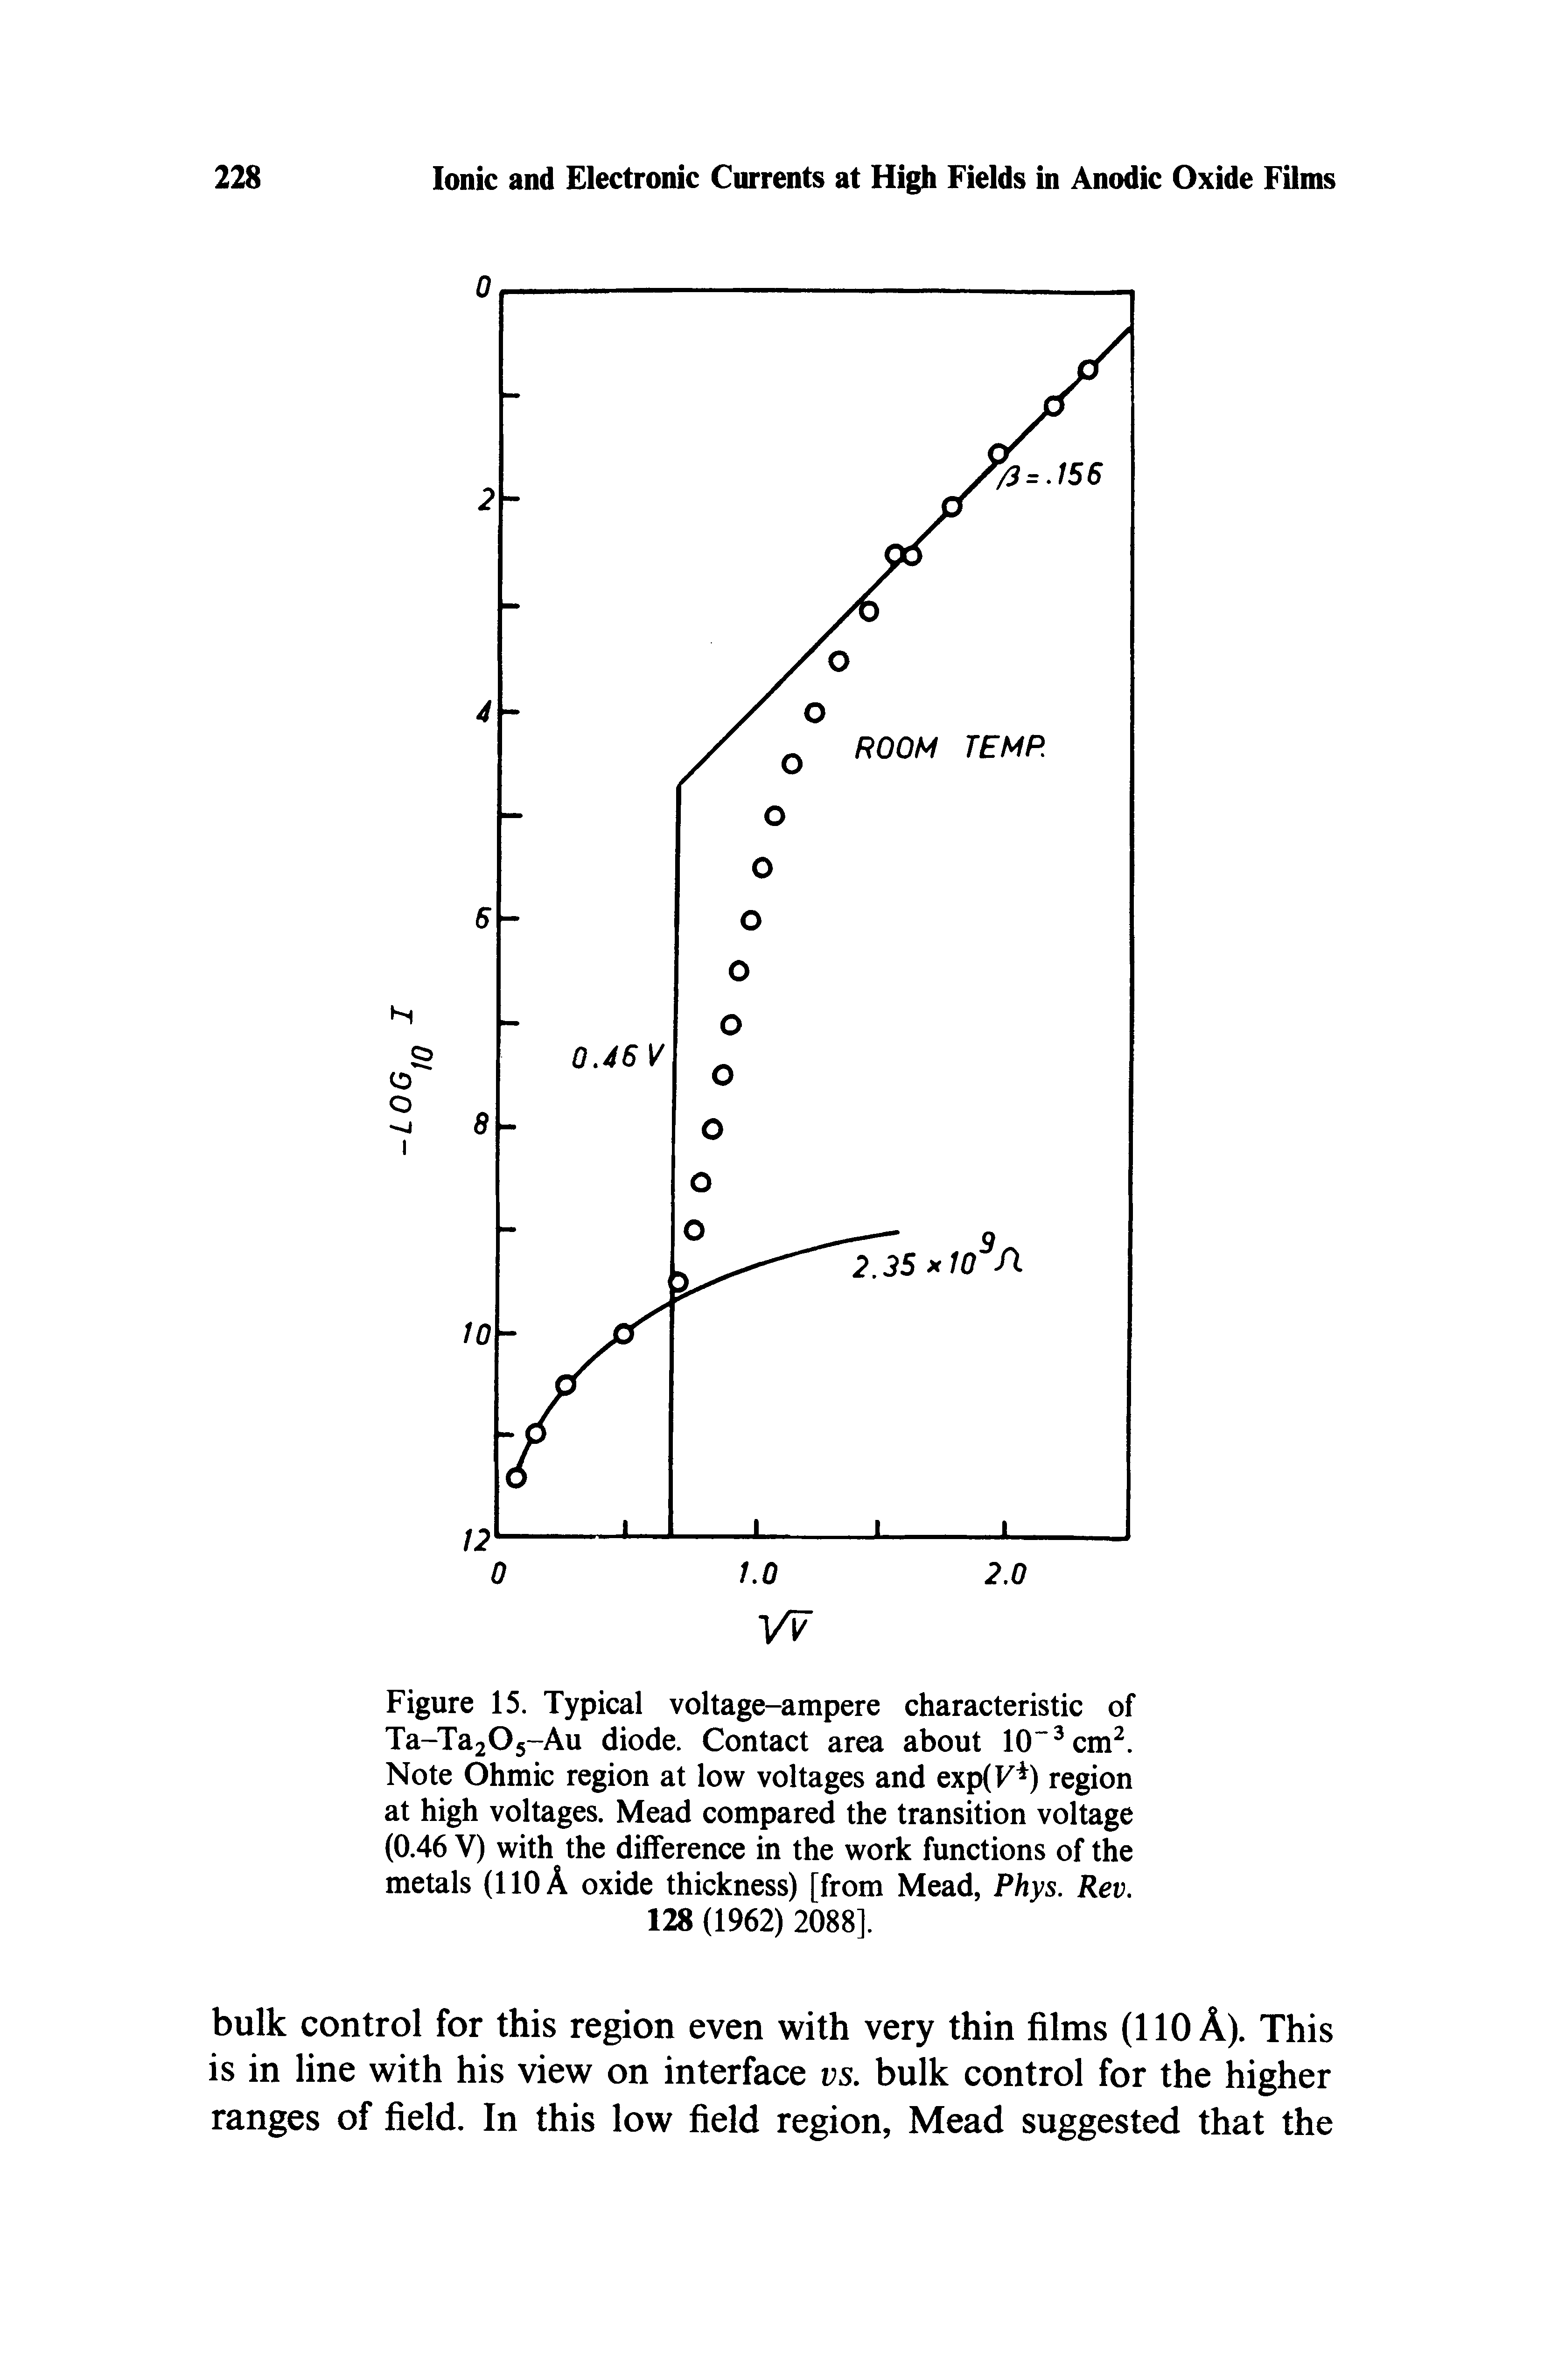 Figure 15. Typical voltage-ampere characteristic of Ta-TajOj-Au diode. Contact area about 10" cm. Note Ohmic region at low voltages and exp(K ) region at high voltages. Mead compared the transition voltage (0.46 V) with the difference in the work functions of the metals (110 A oxide thickness) [from Mead, Phys. Rev.